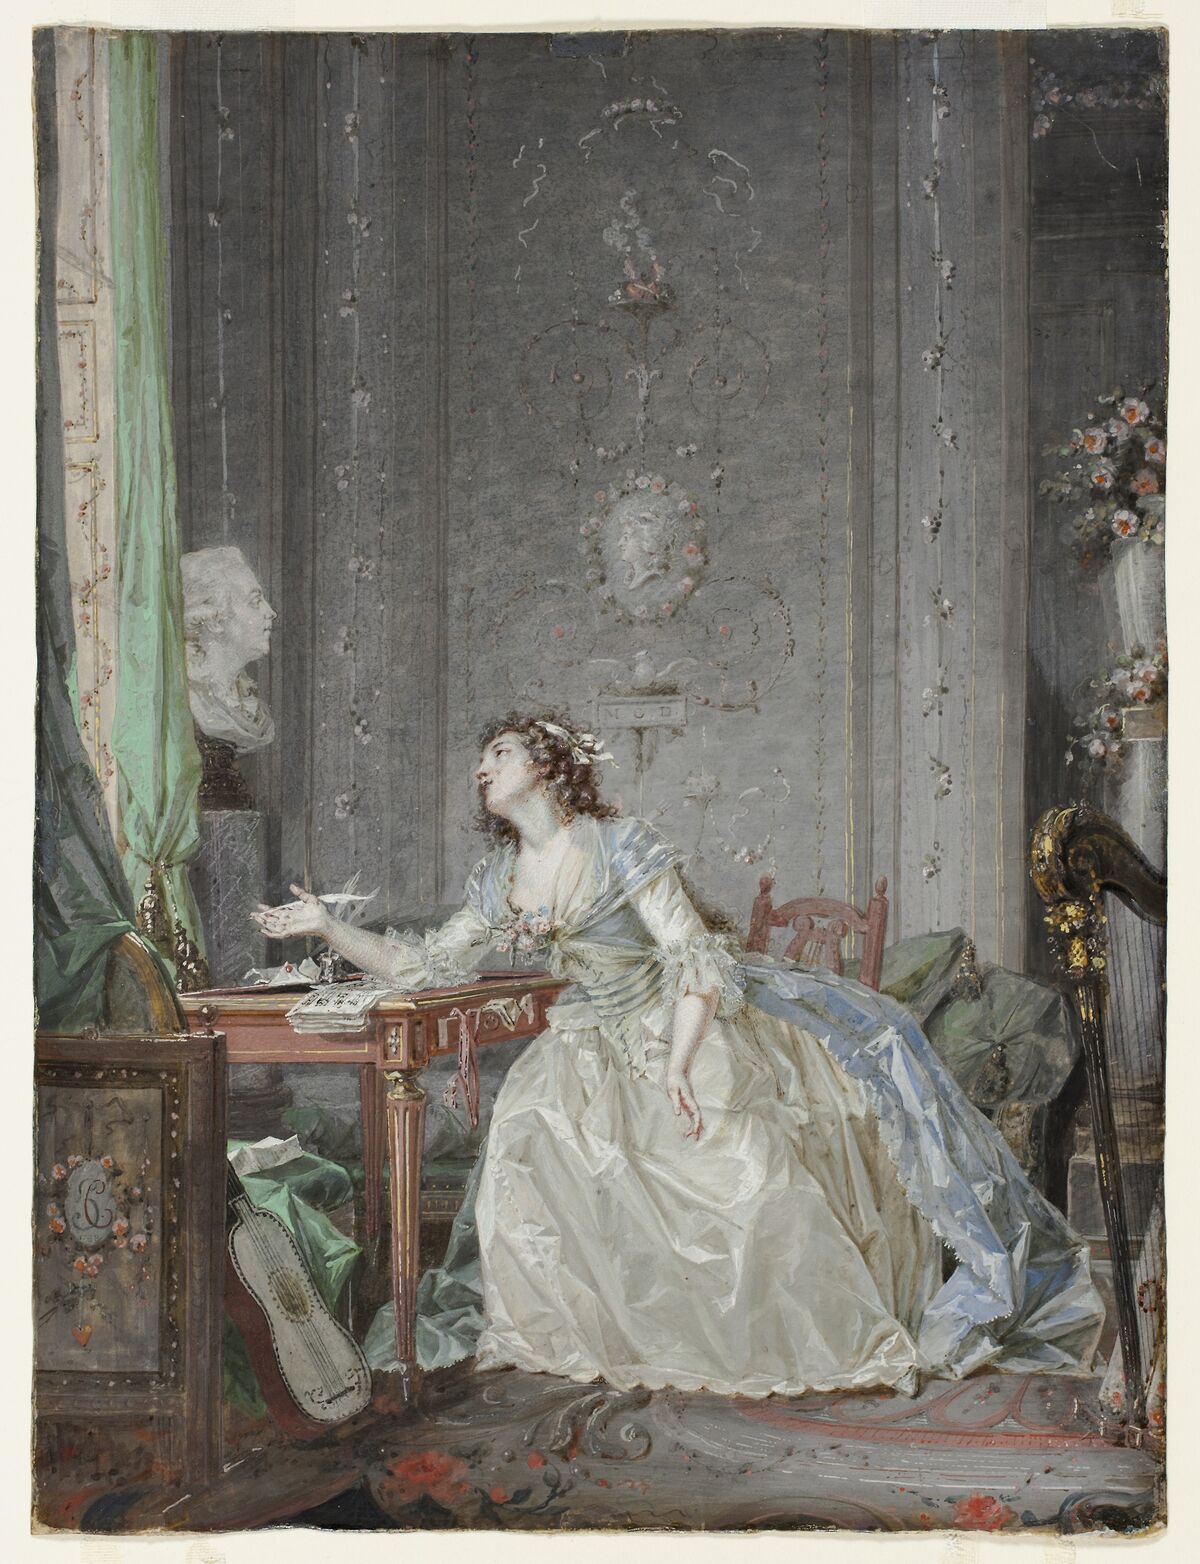 Claude Hoin, Interior with a Portrait of a Young Lady Before a Bust, 1788.  Courtesy of the Art Institute of Chicago.